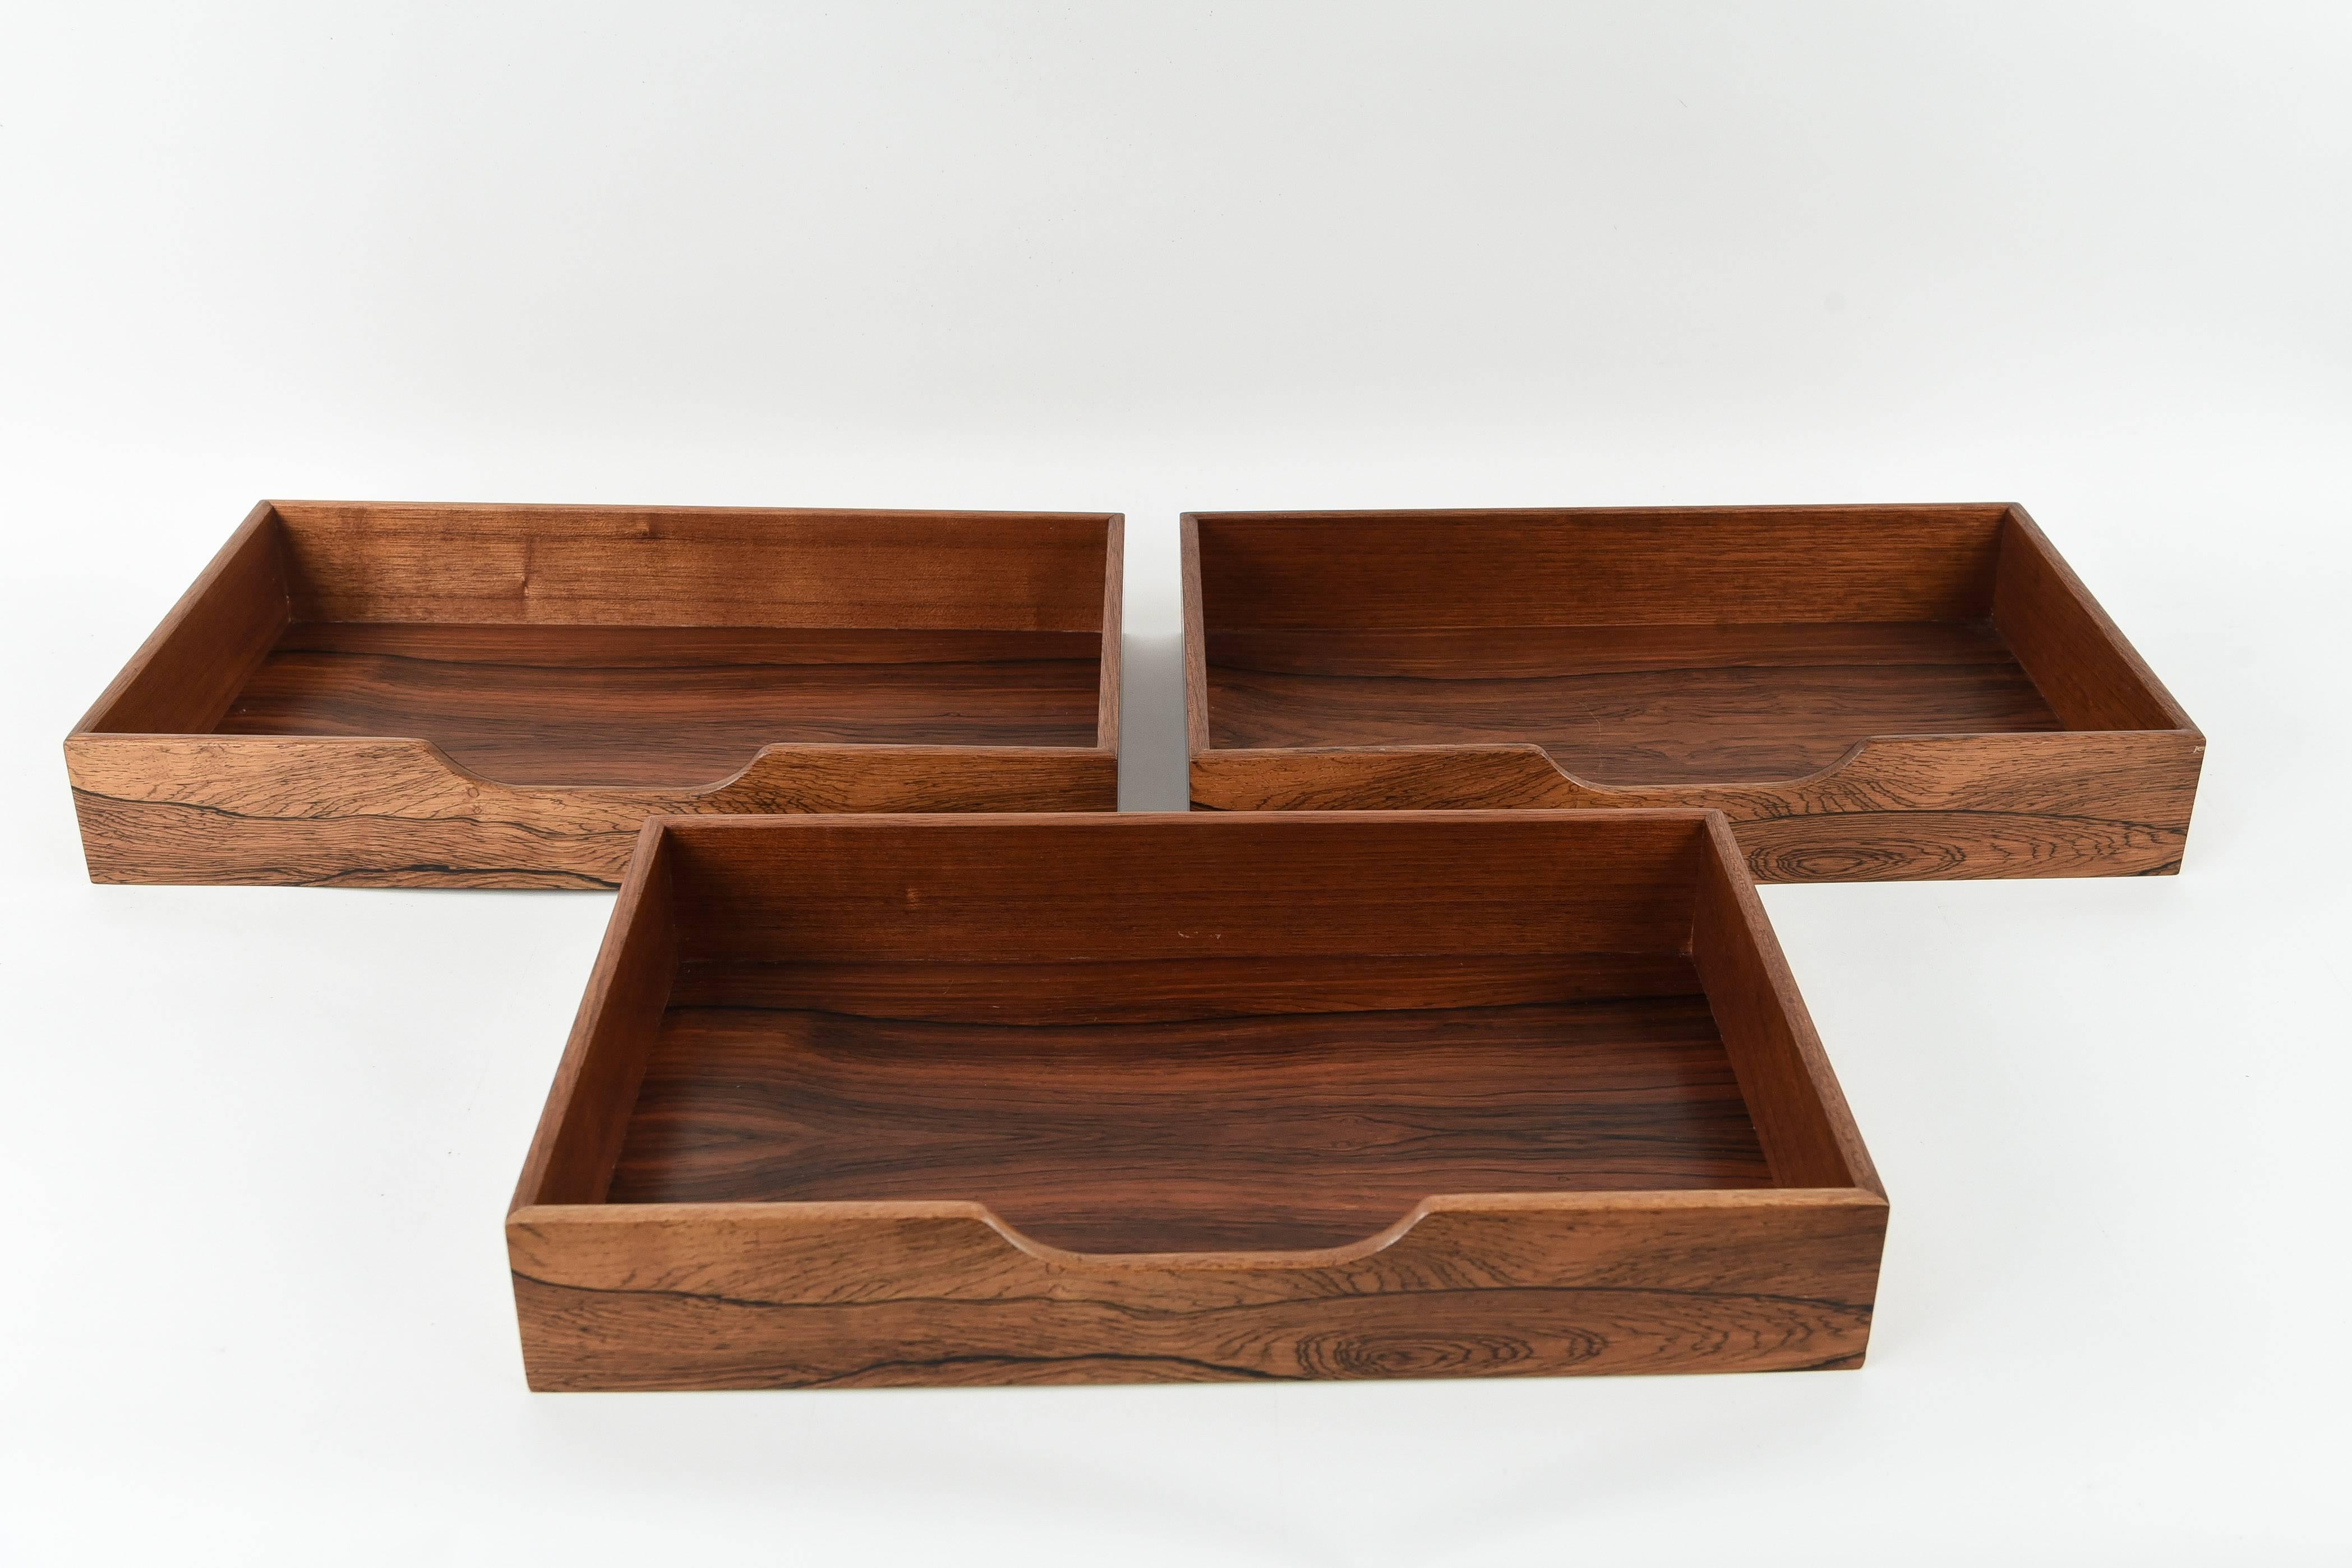 A wonderful grouping of three rosewood desk organizers ready to accent your work space!